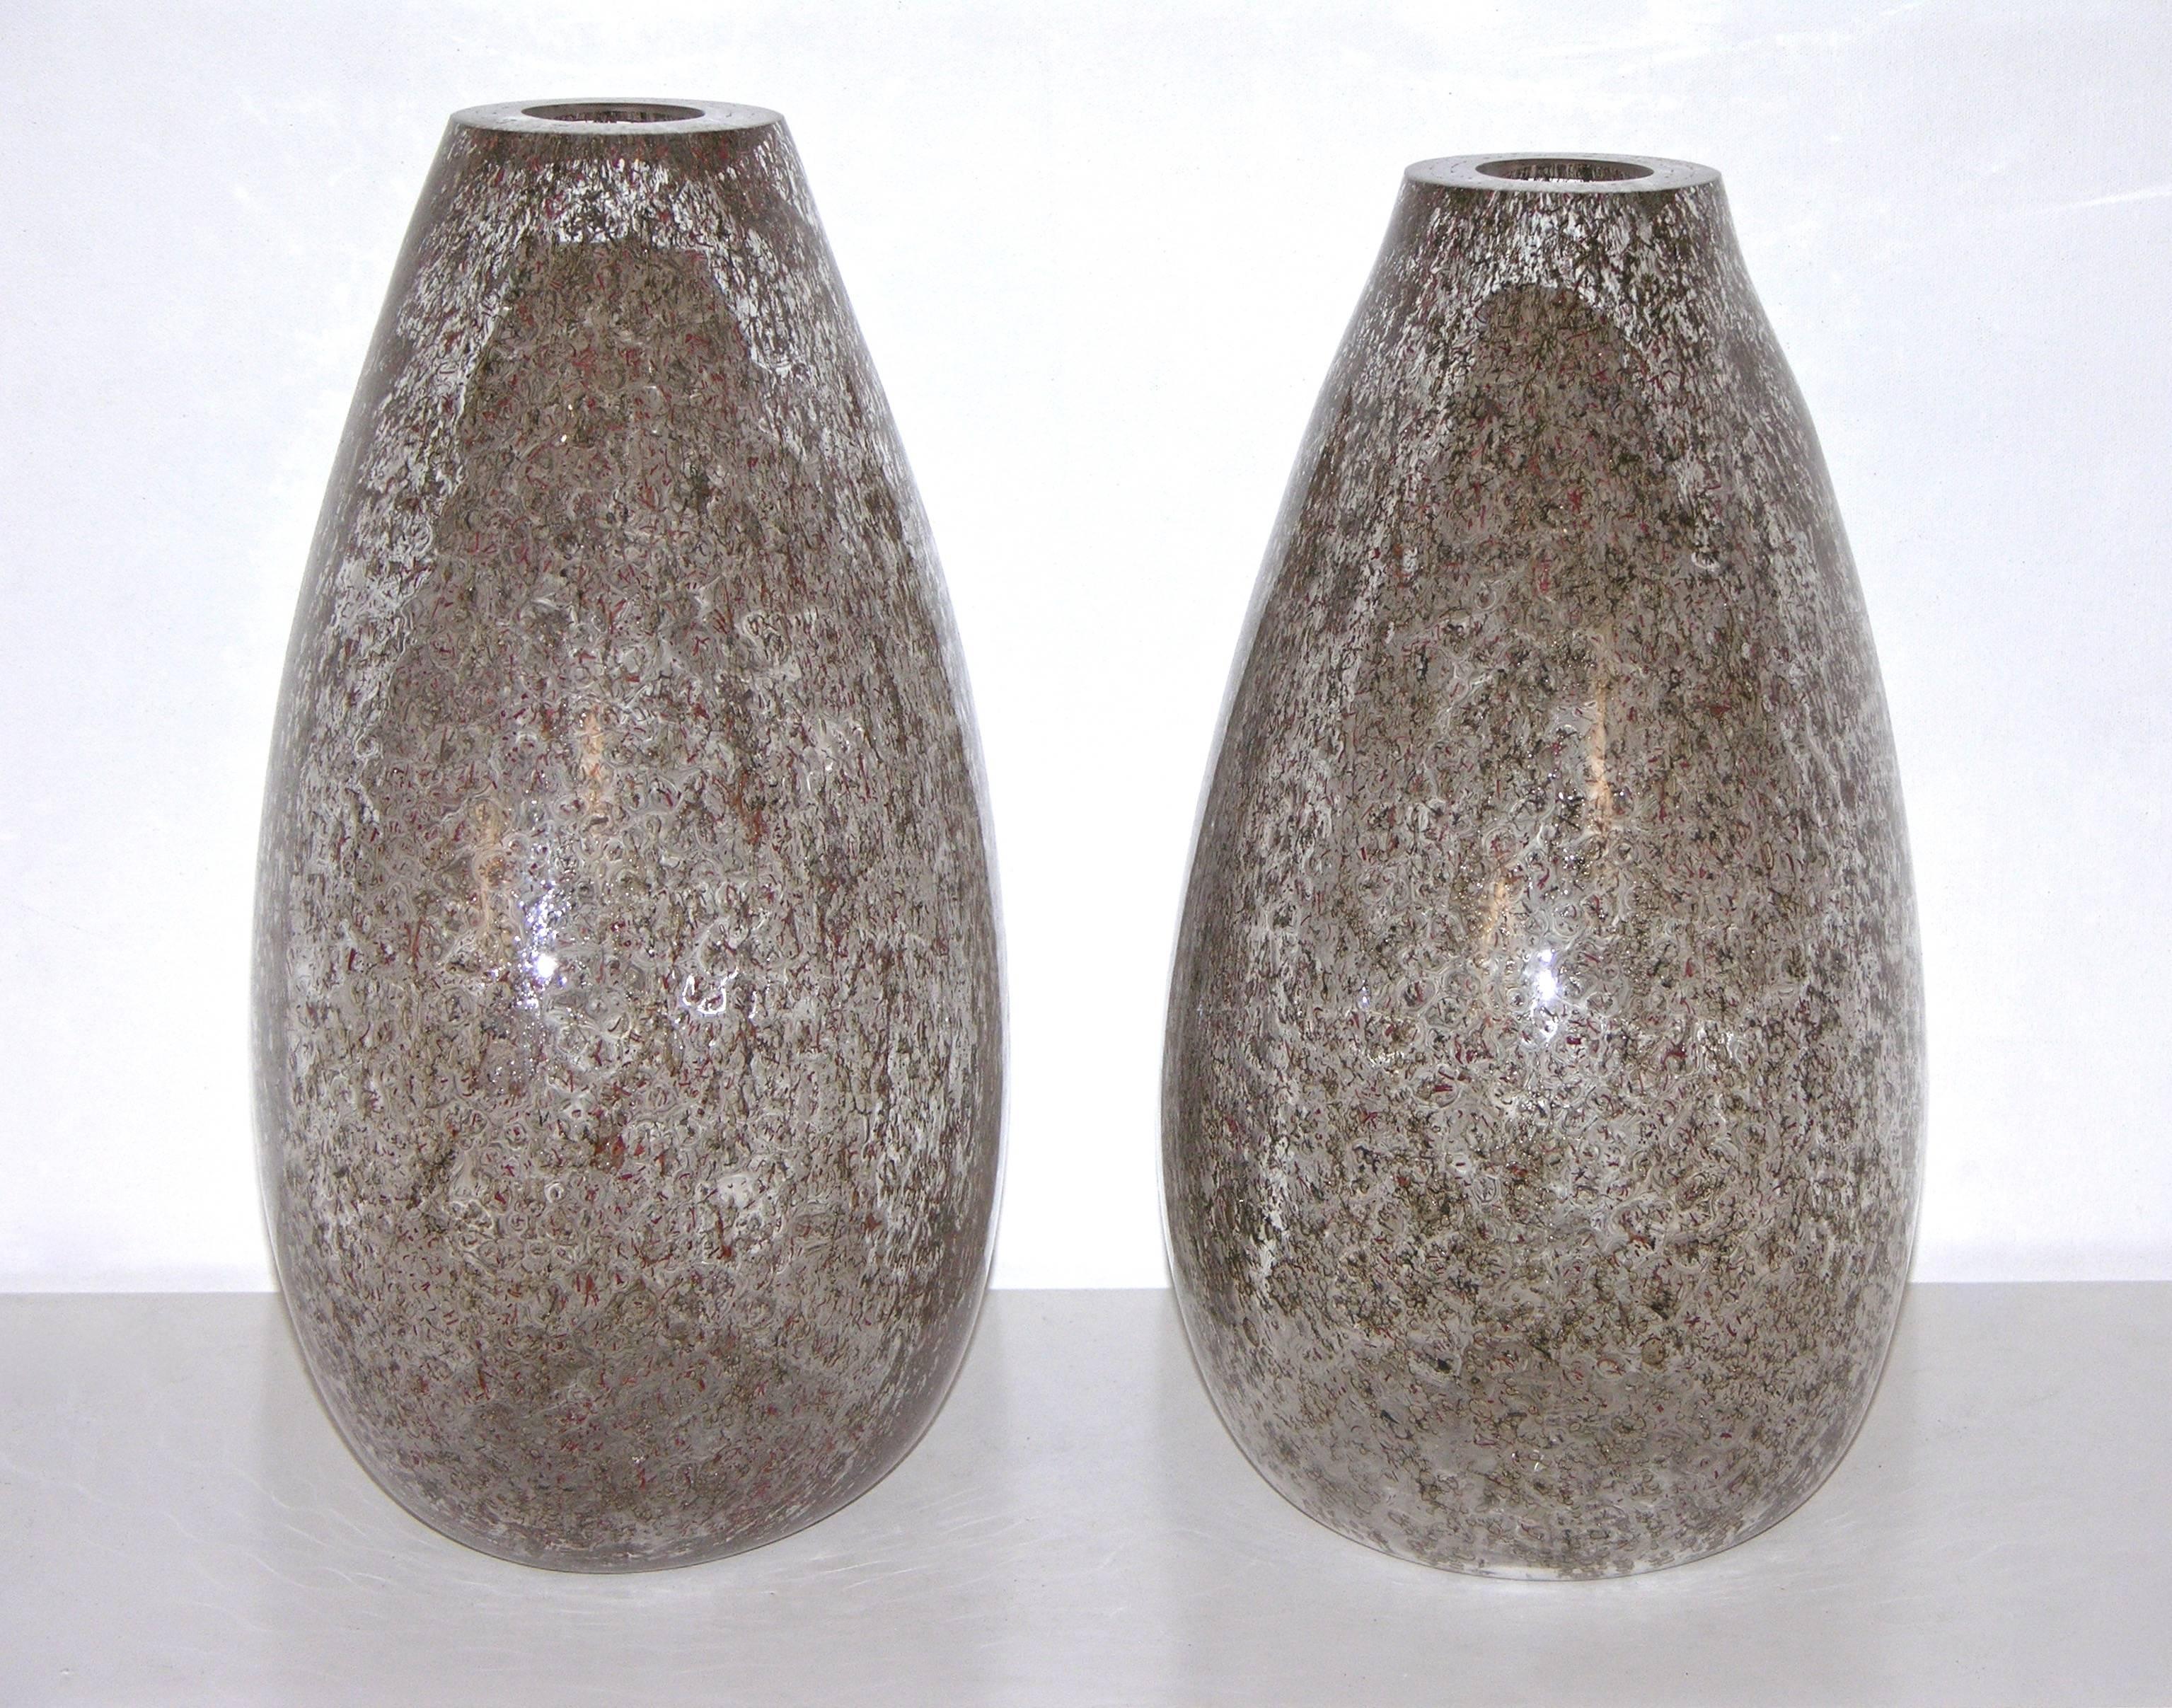 Two very interesting blown Murano glass vases, a creation by Paolo Crepax for Le Fablier, the texture is incredible due to an exceptional technique of inserted red and green organic filaments in the clear glass worked with bubbles.
This is not an